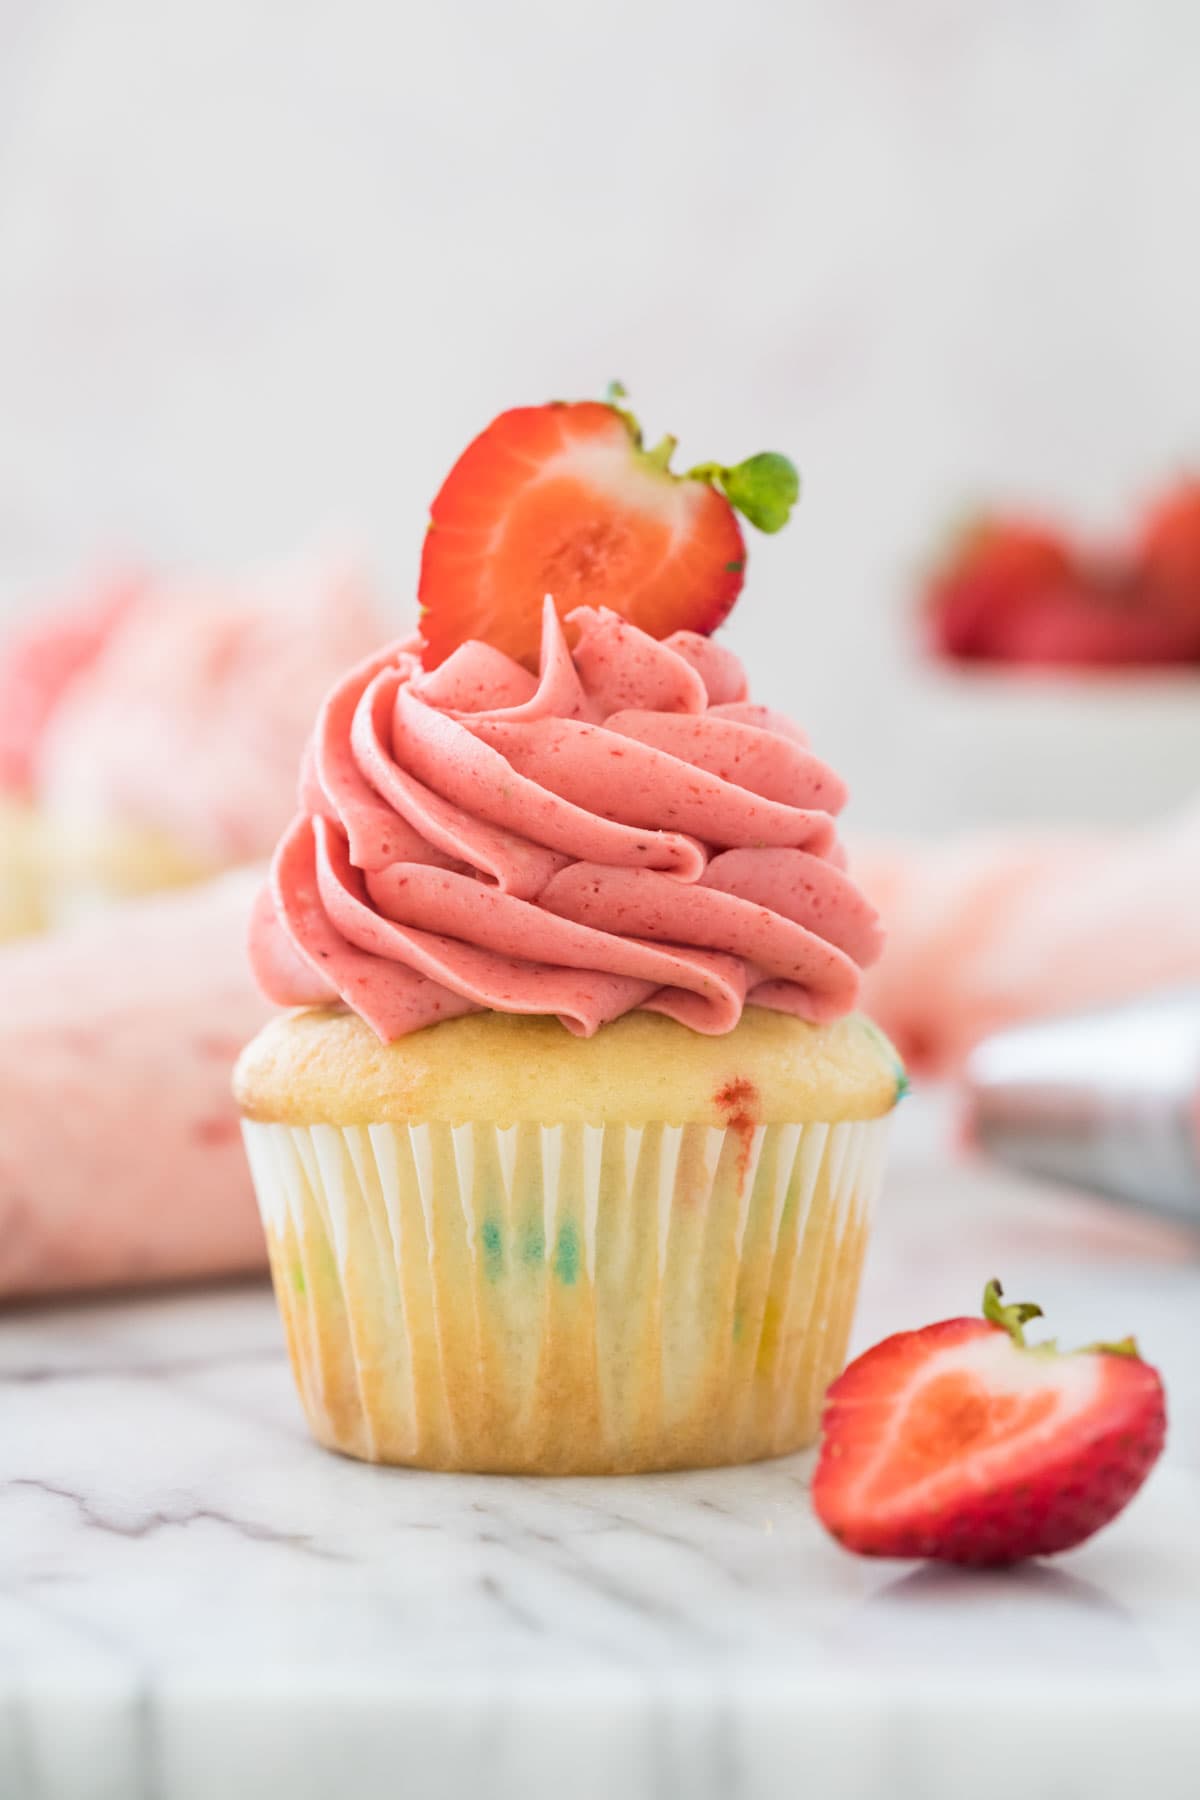 Vanilla cupcake topped with bright pink strawberry frosting and a halved fresh strawberry